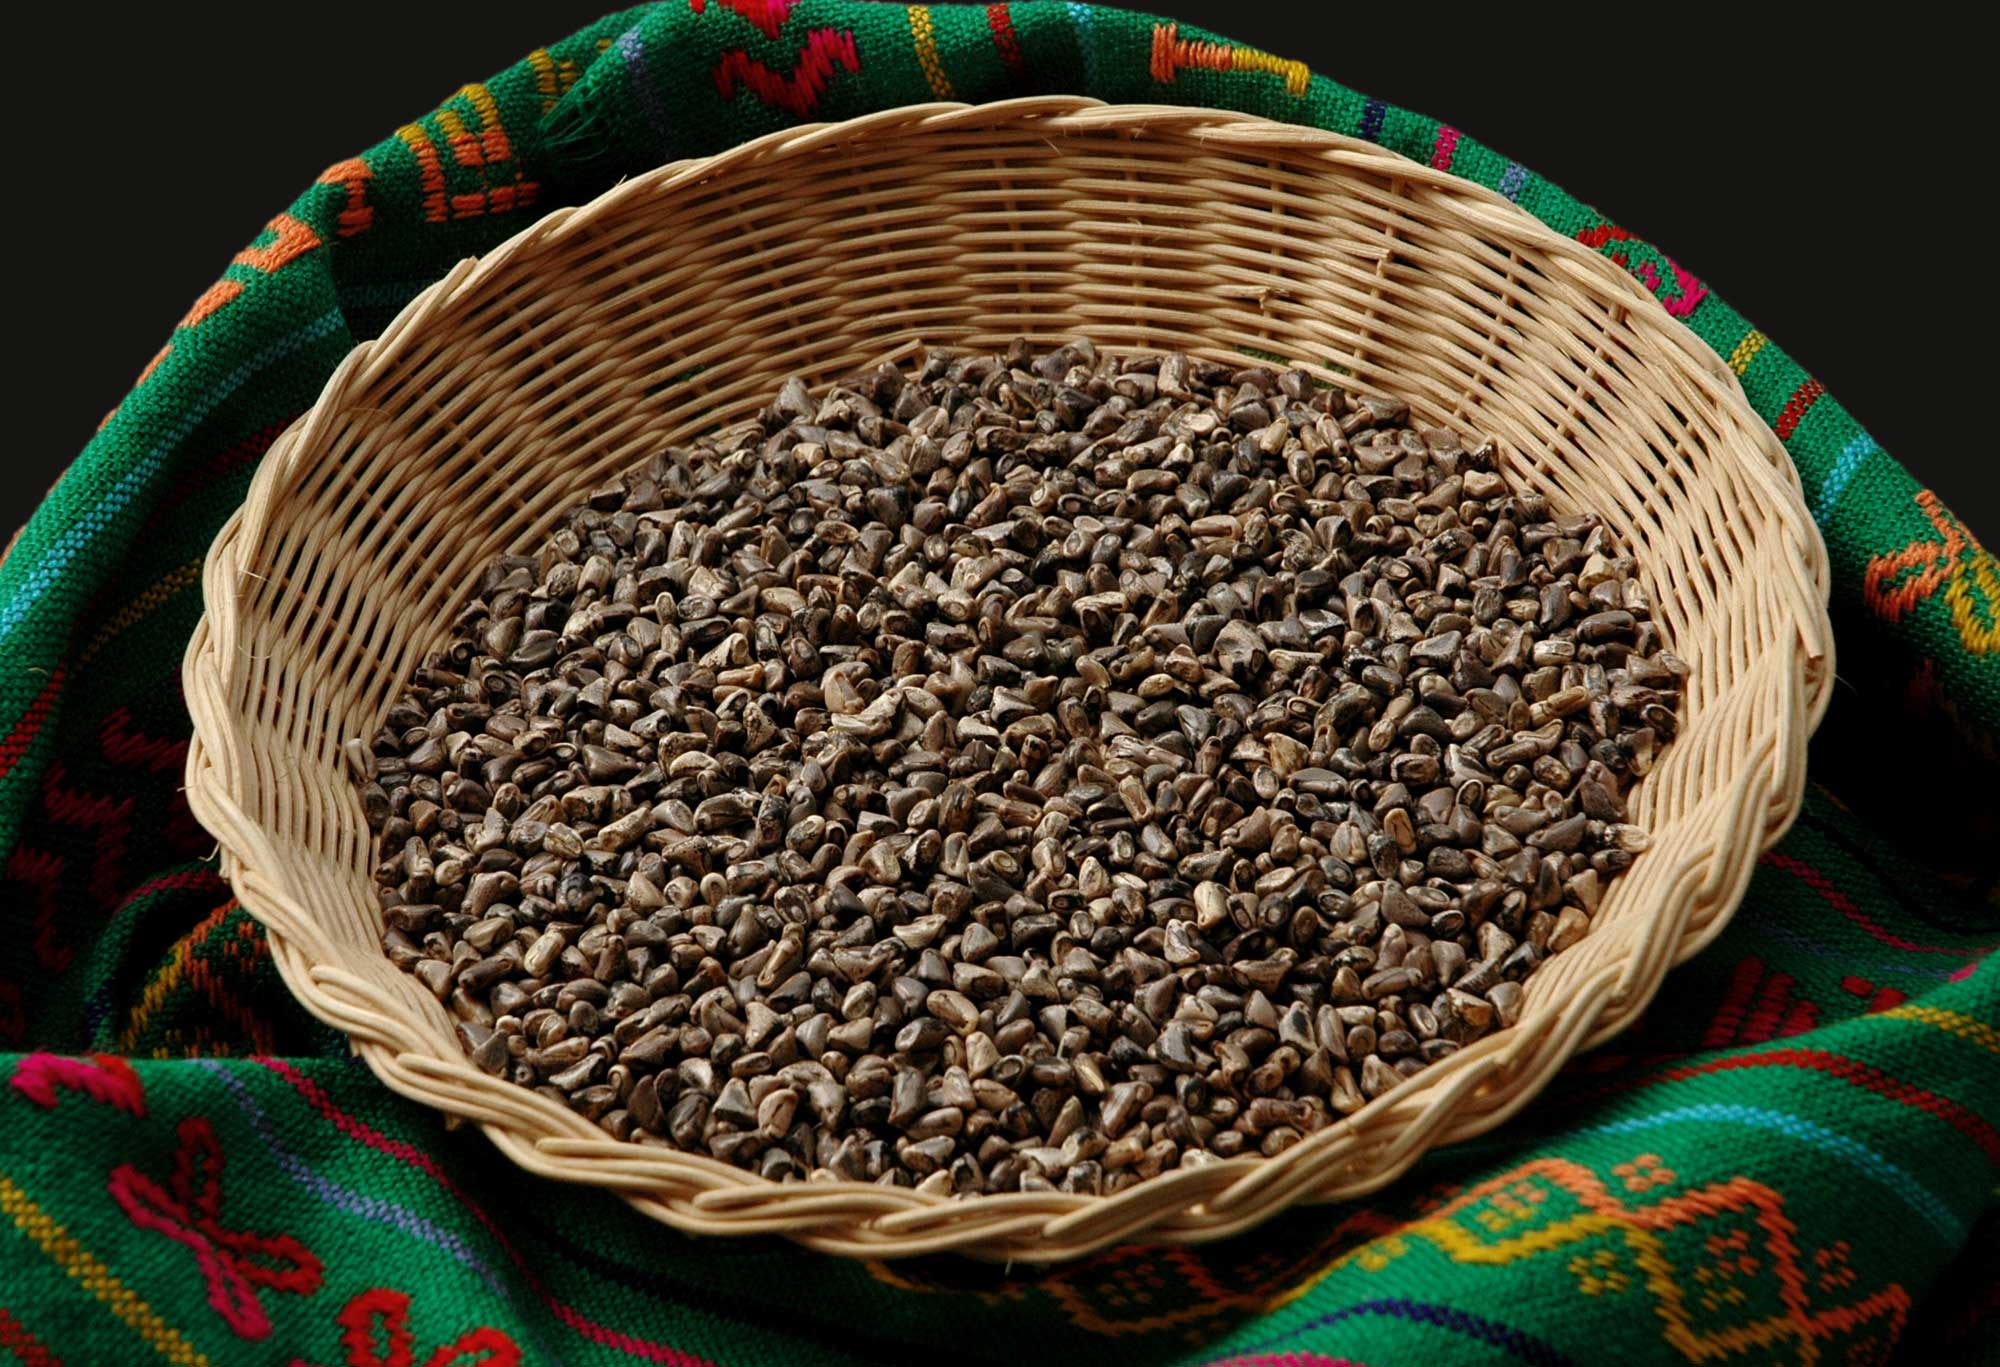 Photograph of a woven basket partially filled with teosinte kernels. The kernels are light to dark brown in color and roughly triangular in shape.